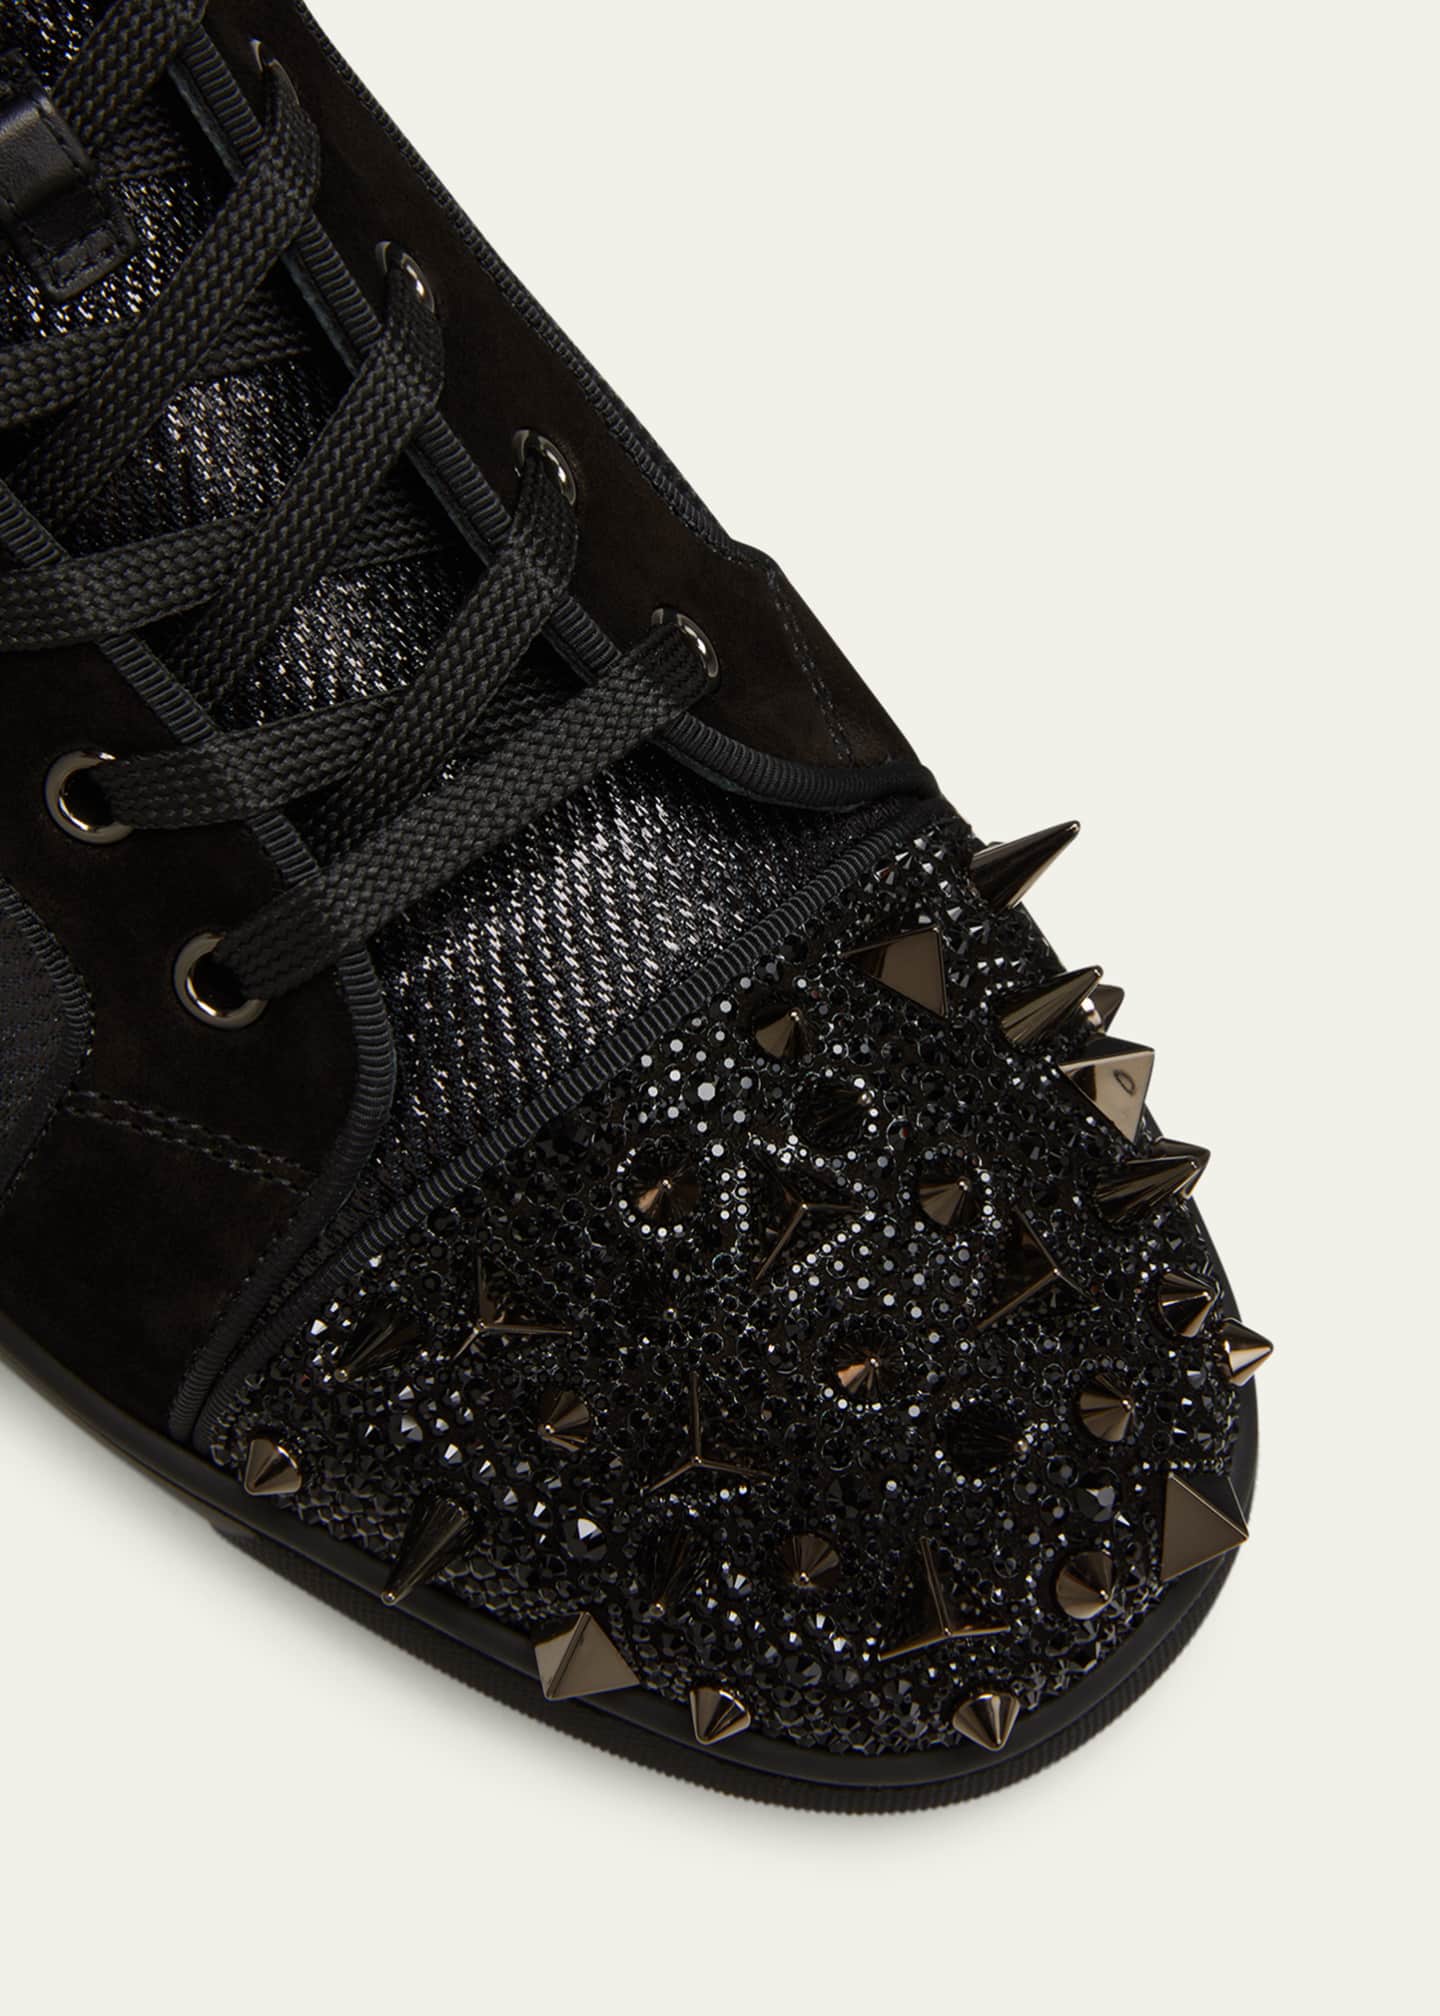 black crystal, christian louboutin strass shoes high top sneakers